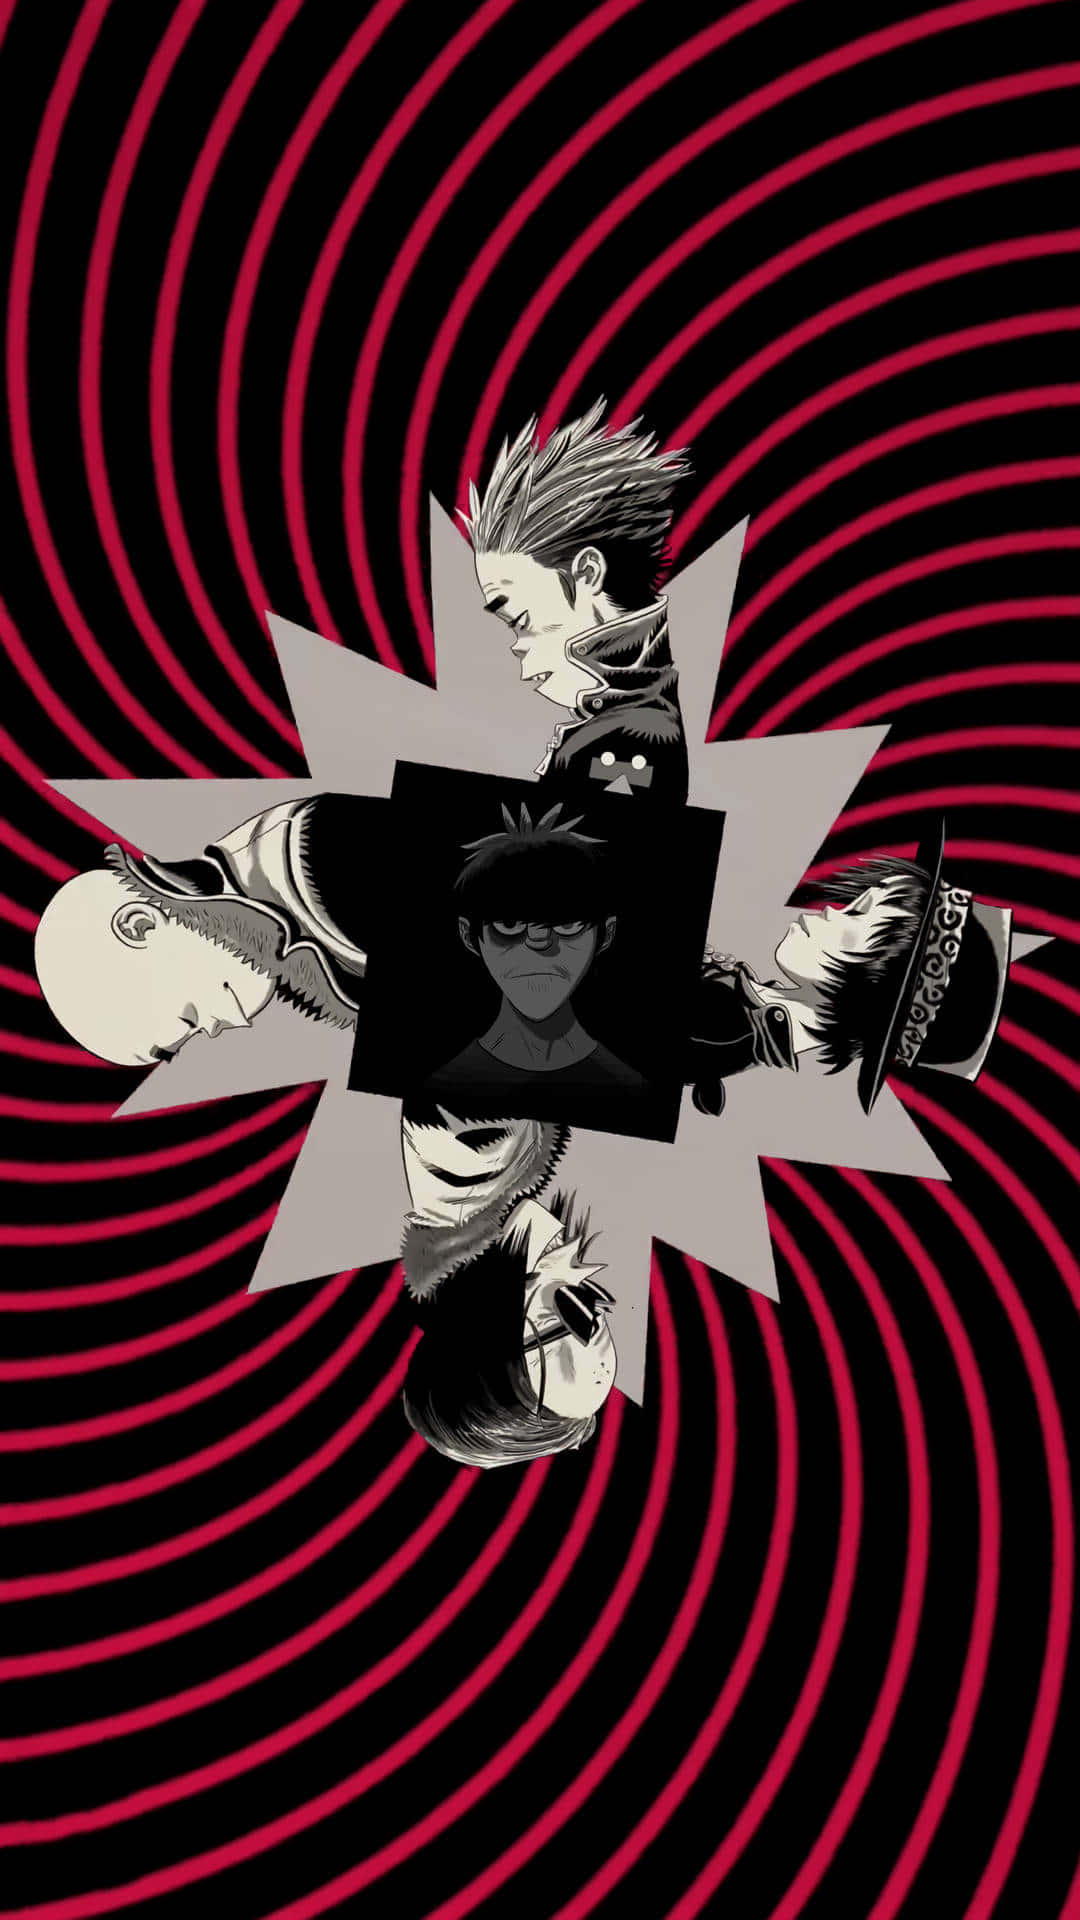 Gorillaz – virtual pioneers of the music industry.